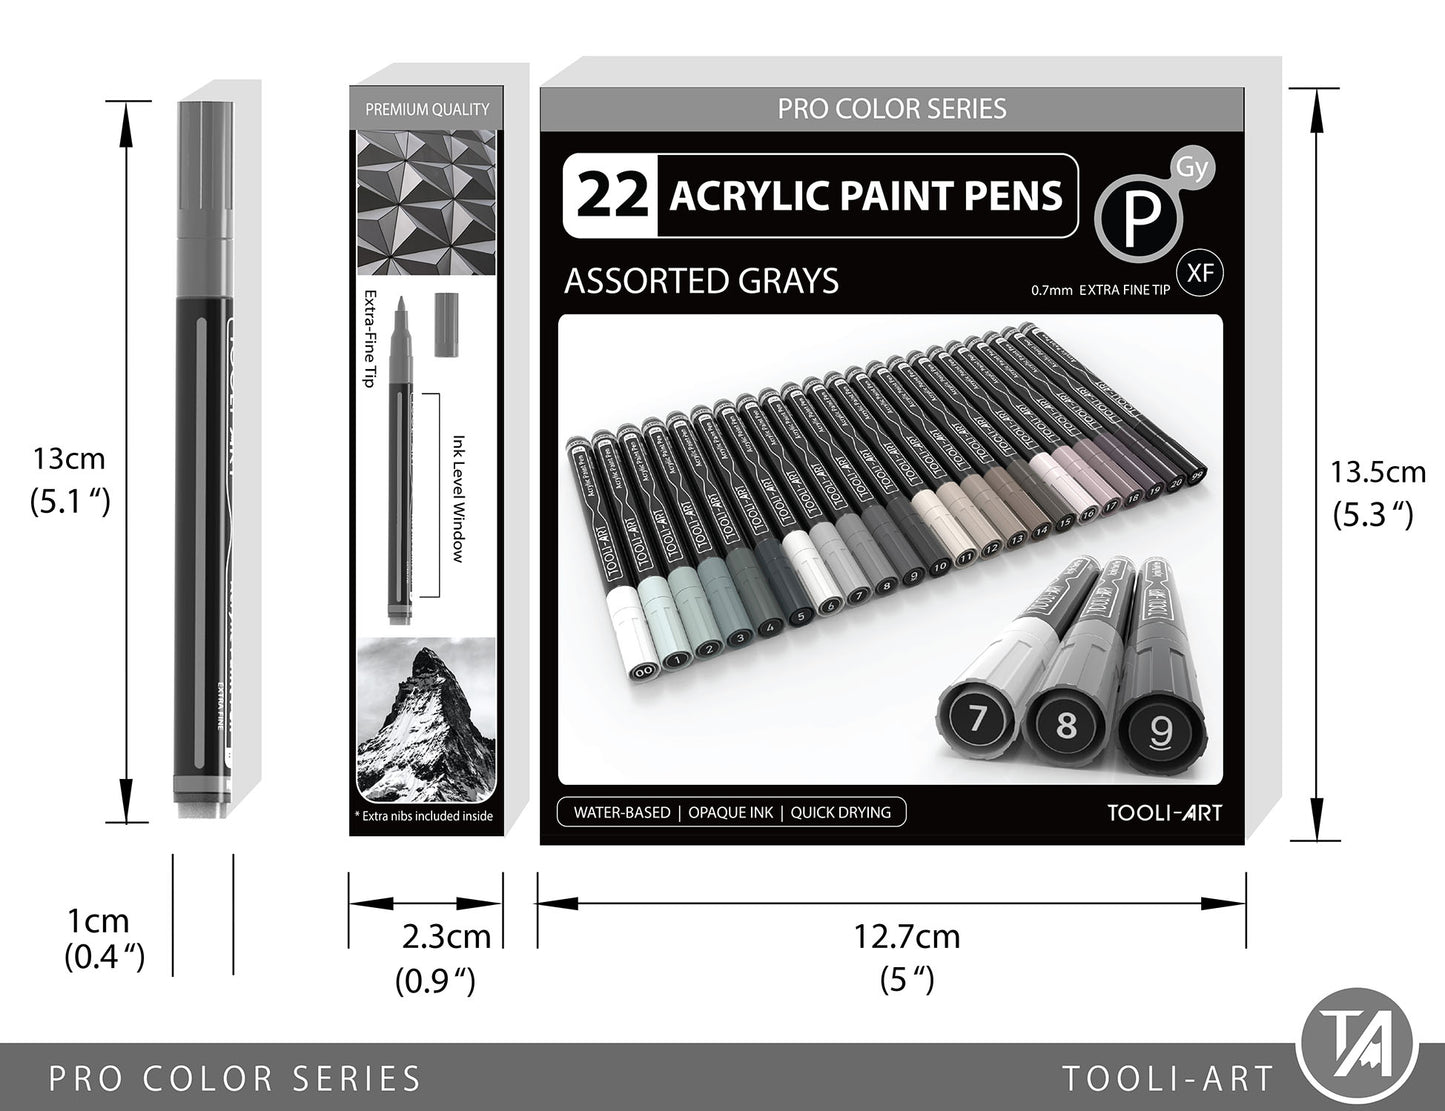 Acrylic Paint Pens 22 Assorted Gray Pro Color Series Specialty Markers Set (0.7mm EXTRA FINE)